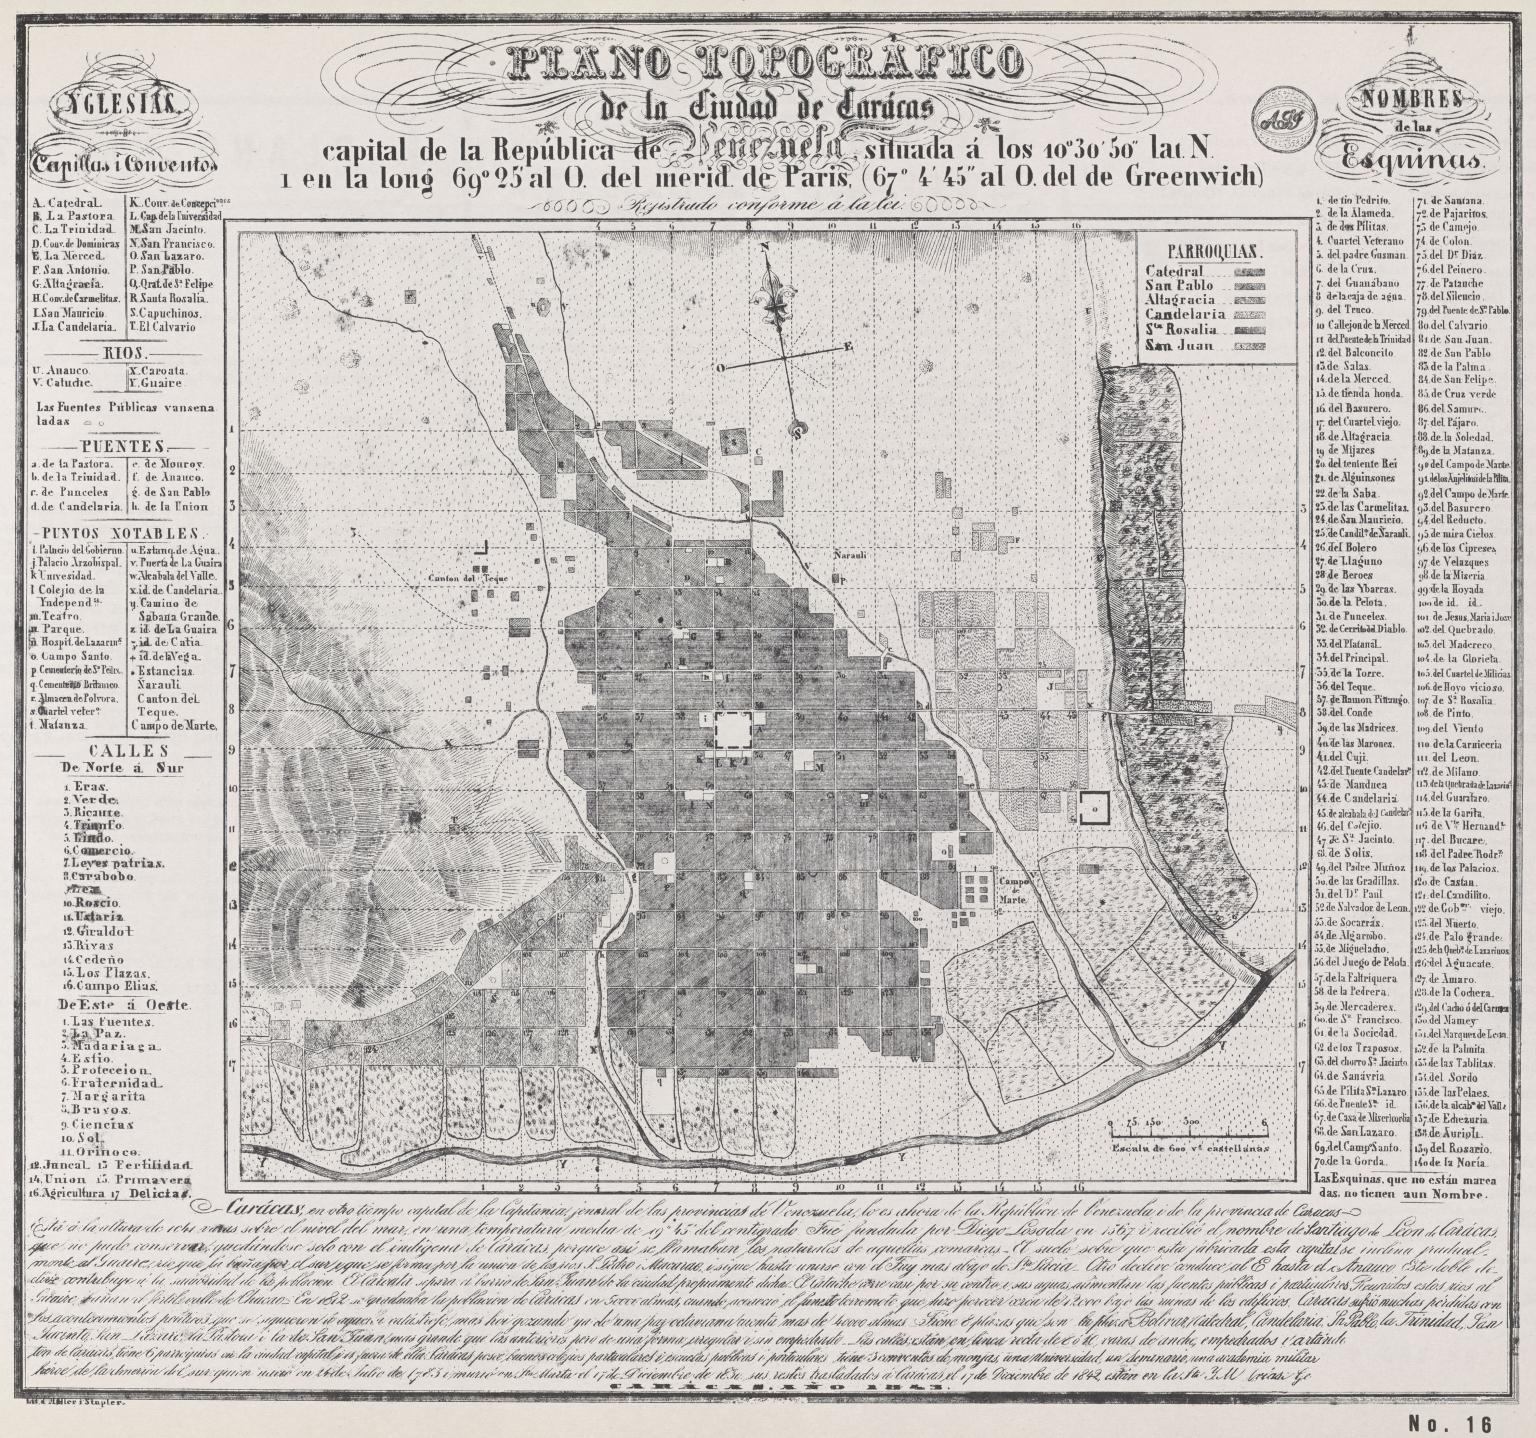 Topographic map, with place names in columns on left and right side and Spanish text below.